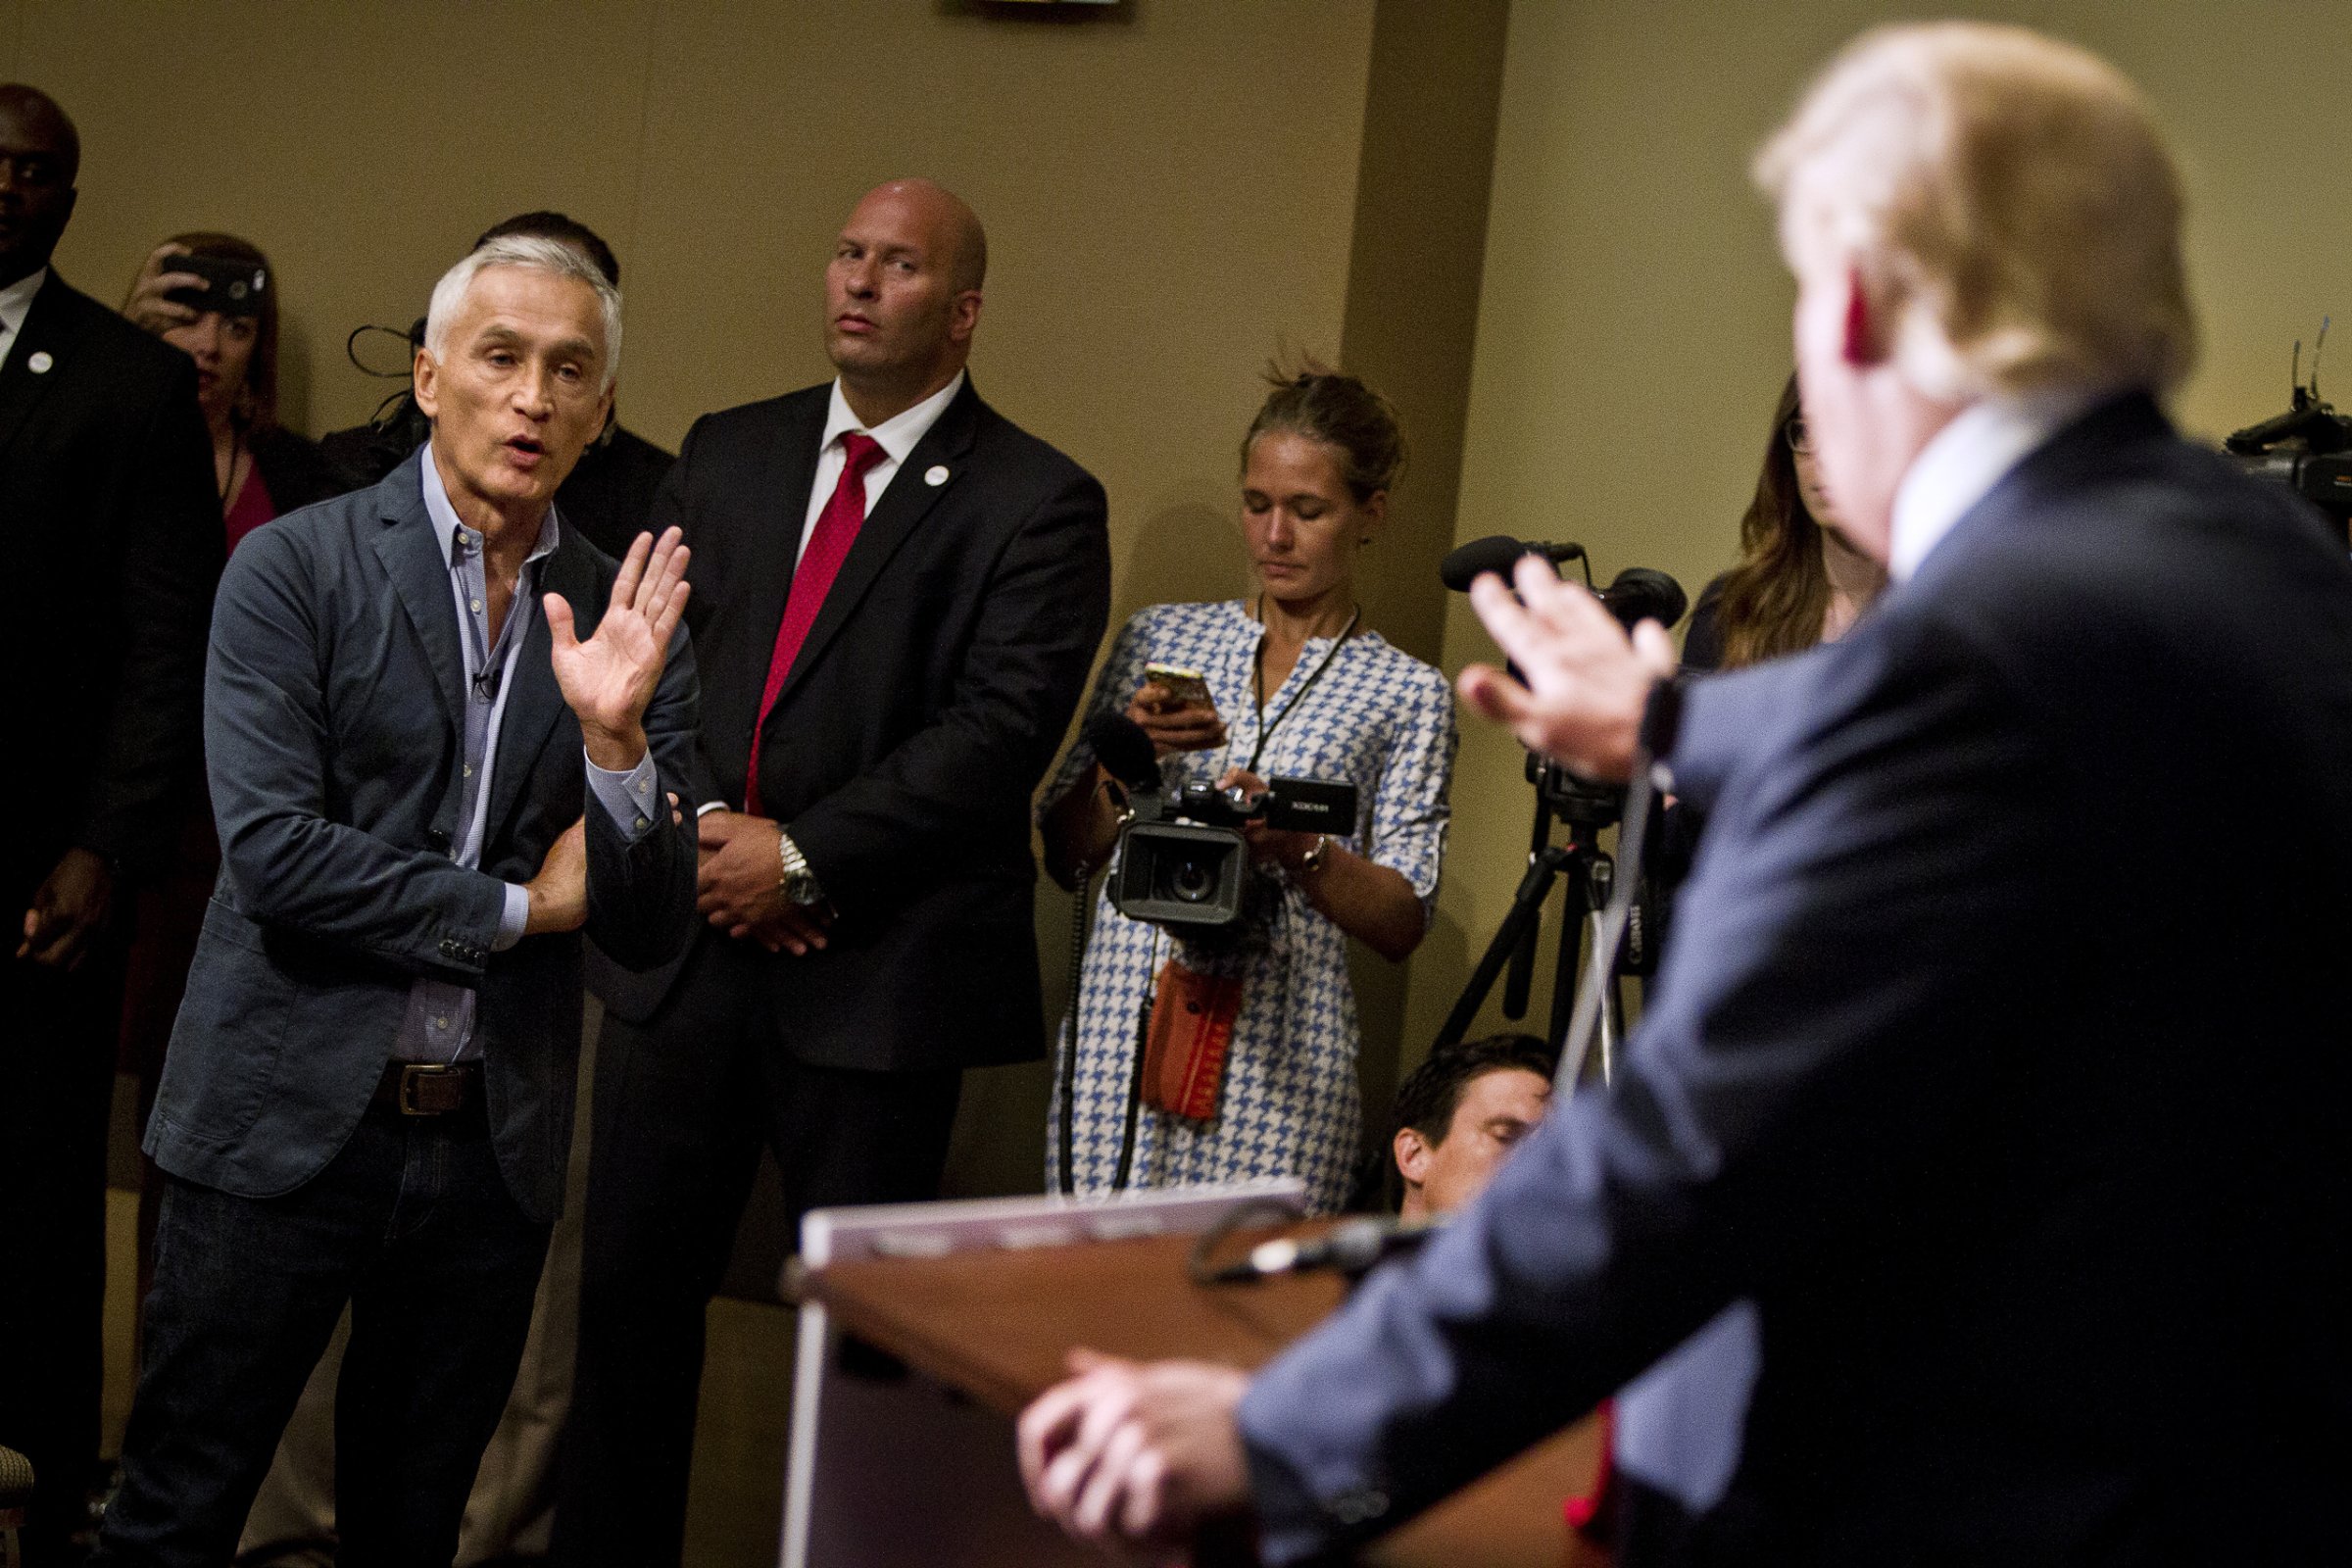 Republican presidential candidate Donald Trump spars with Univision reporter Jorge Ramos before his "Make America Great Again Rally" at the Grand River Center in Dubuque, Iowa, August 25, 2015. Ramos was removed from Trump's news conference on Tuesday after the Republican presidential candidate said the journalist was asking a question out of turn. REUTERS/Ben Brewer TPX IMAGES OF THE DAY - RTX1PNL1